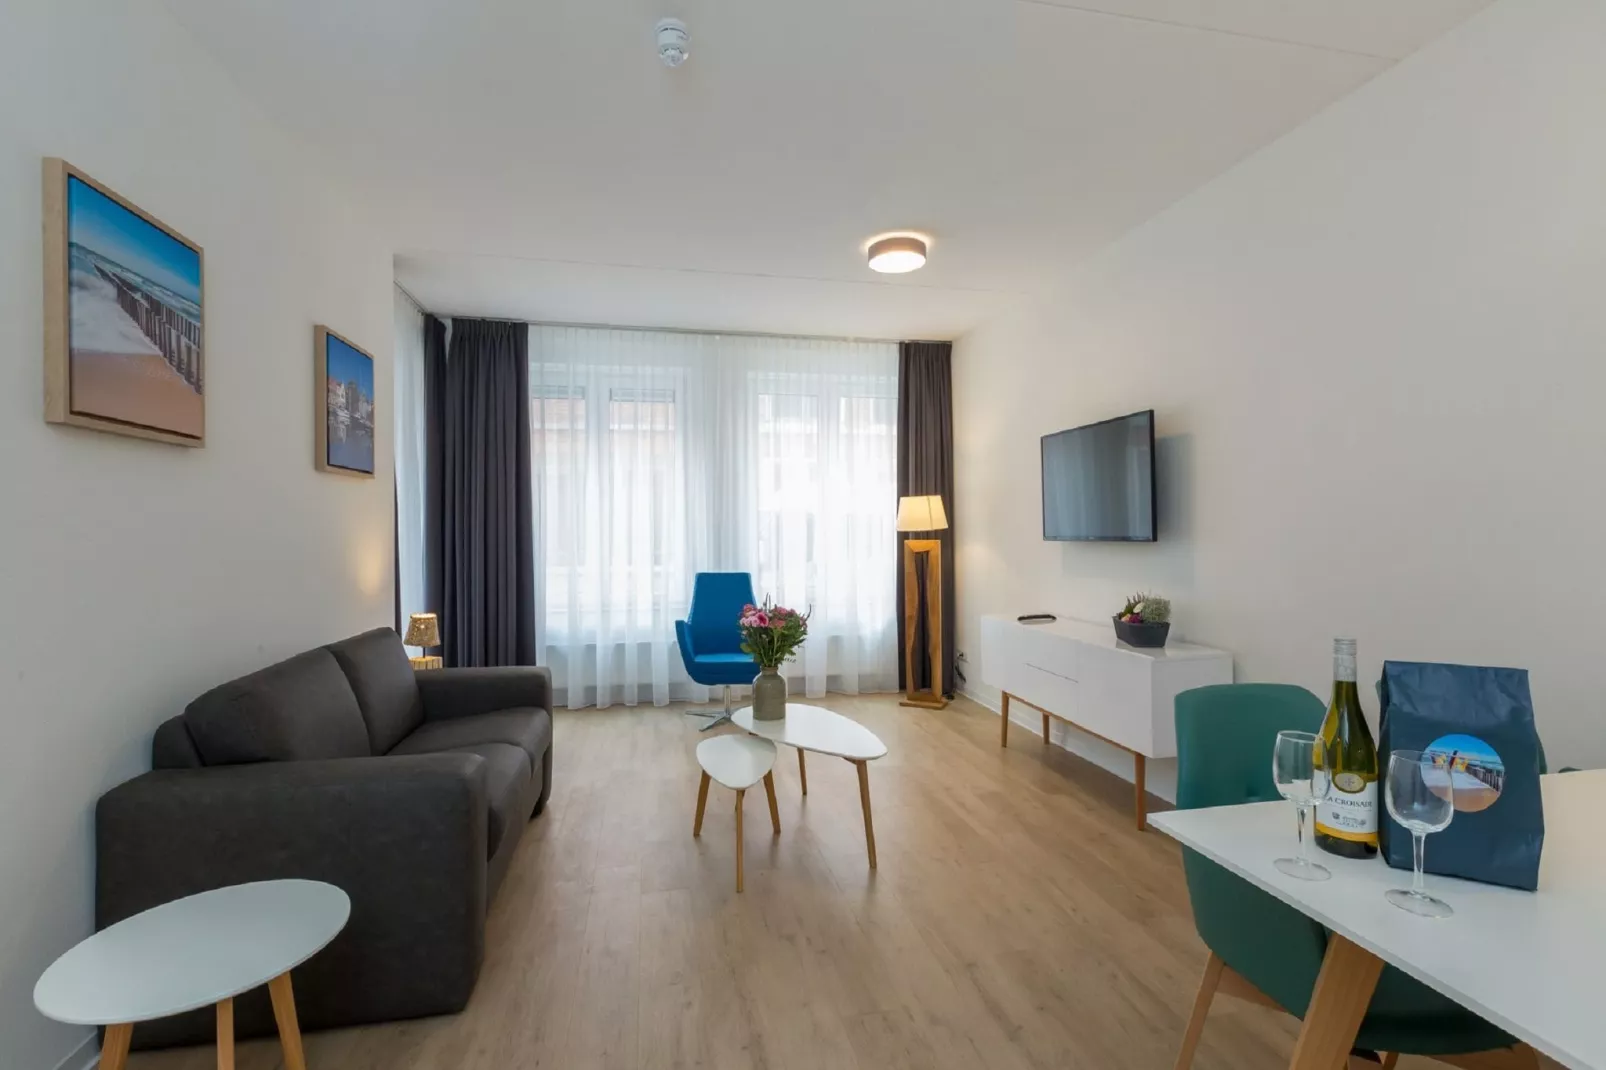 Aparthotel Zoutelande - 4 pers luxe appartement-Woonkamer